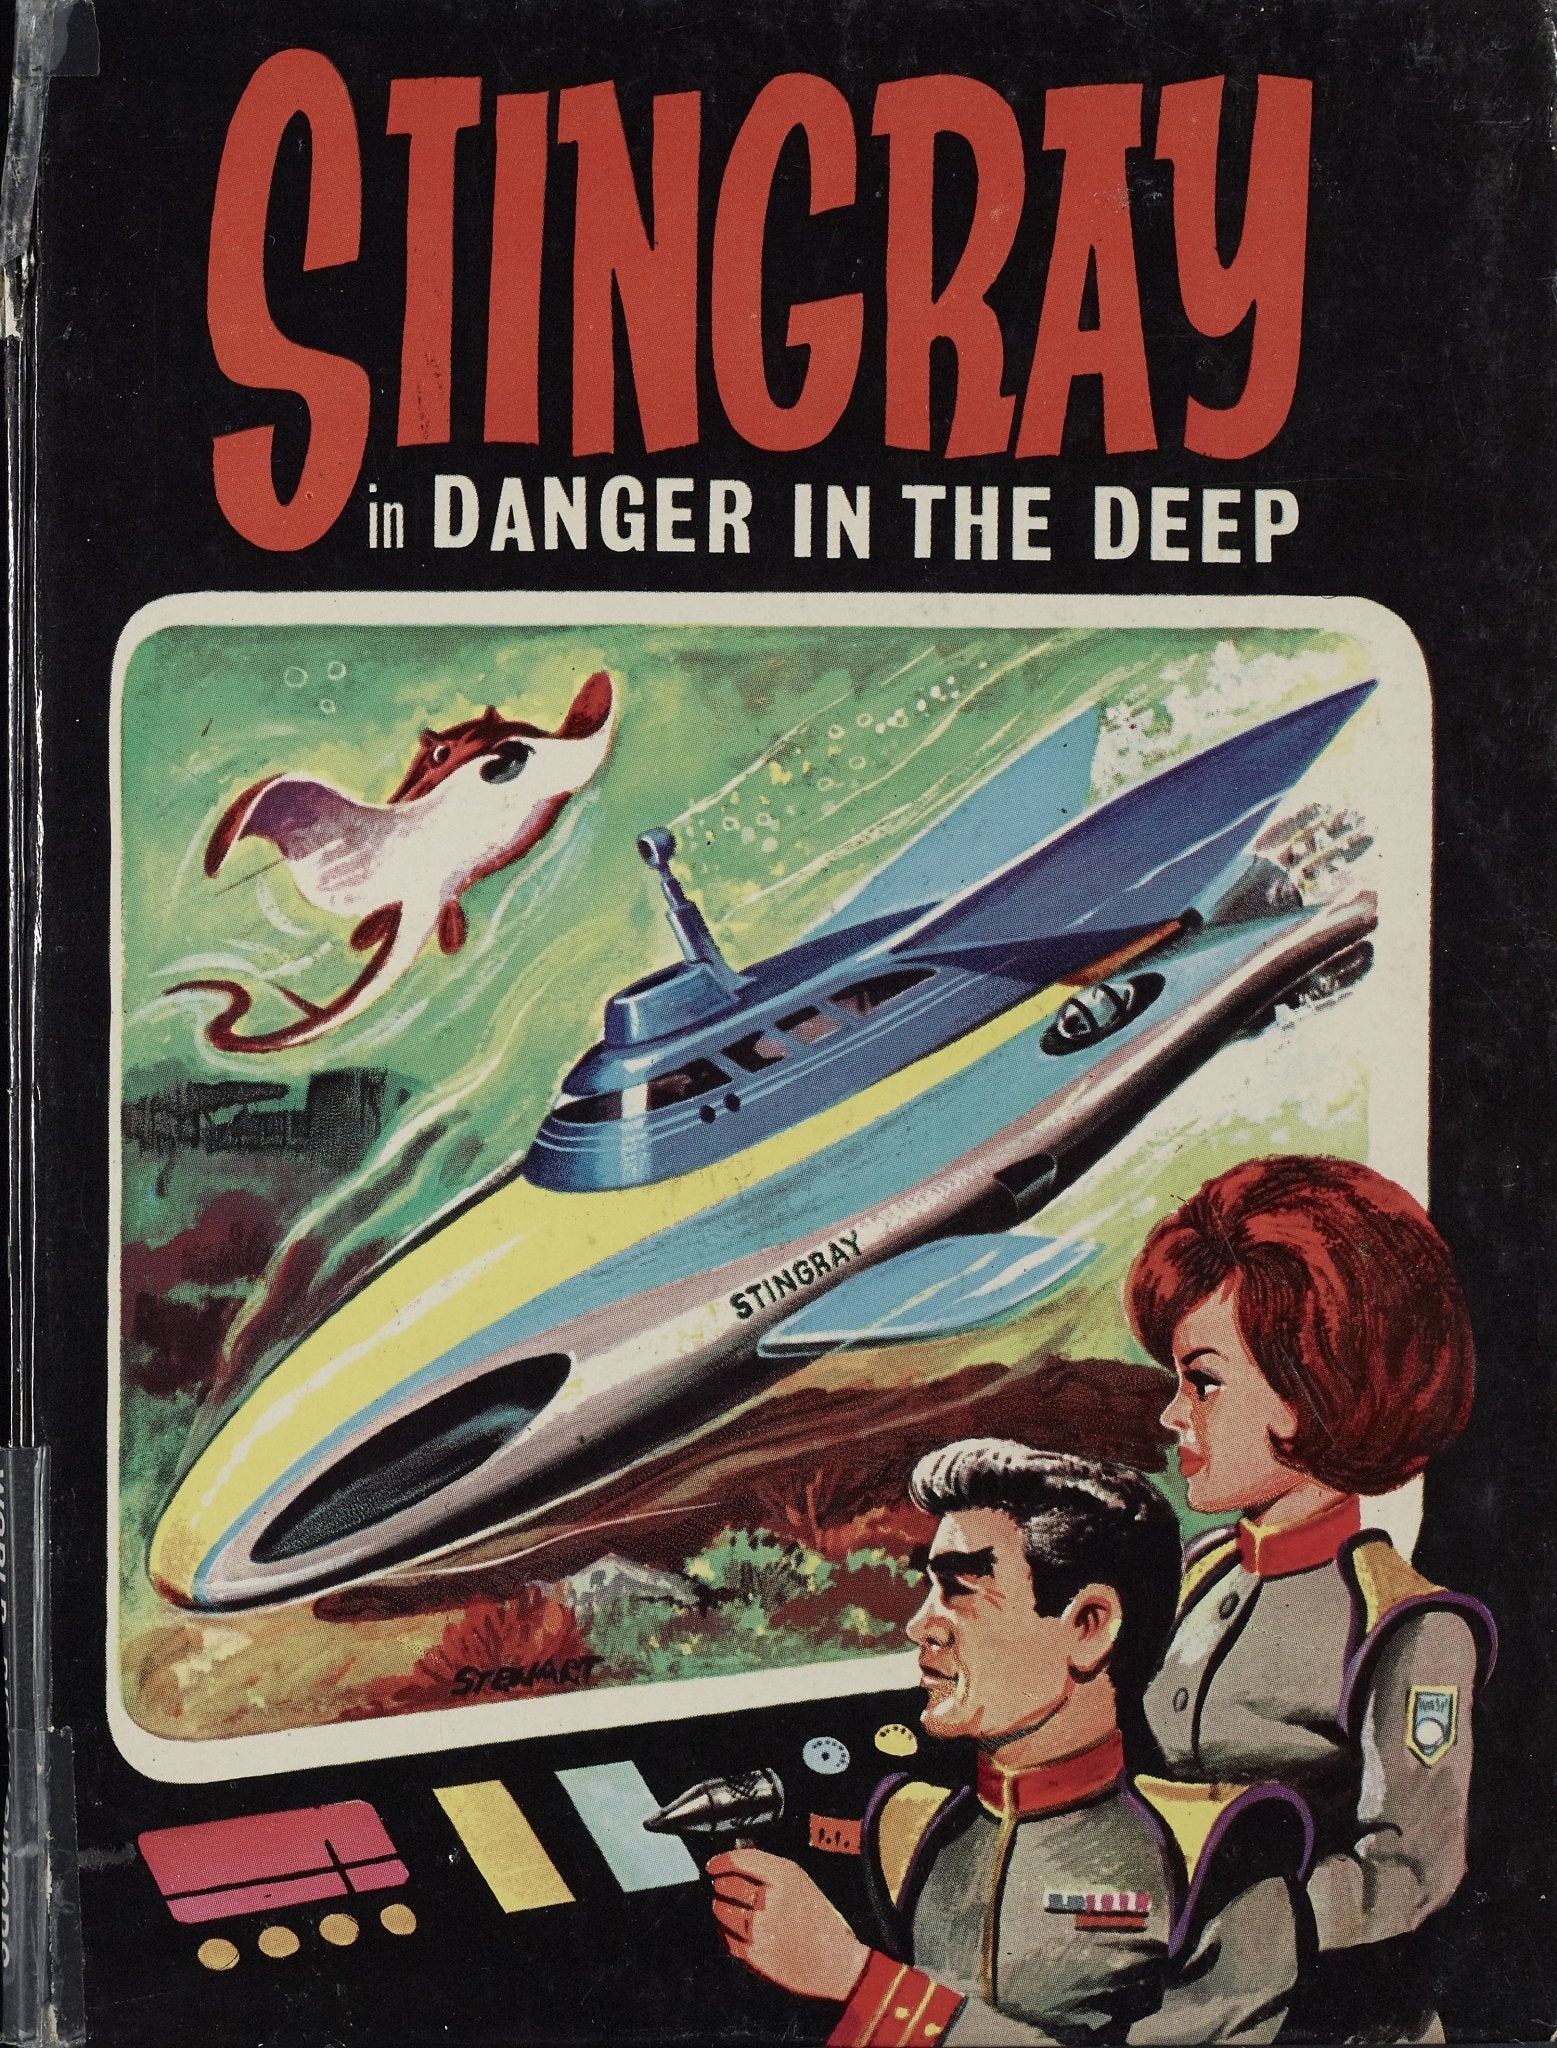 Stingray - Danger in the Deep Excerpt - The Gerry Anderson Store